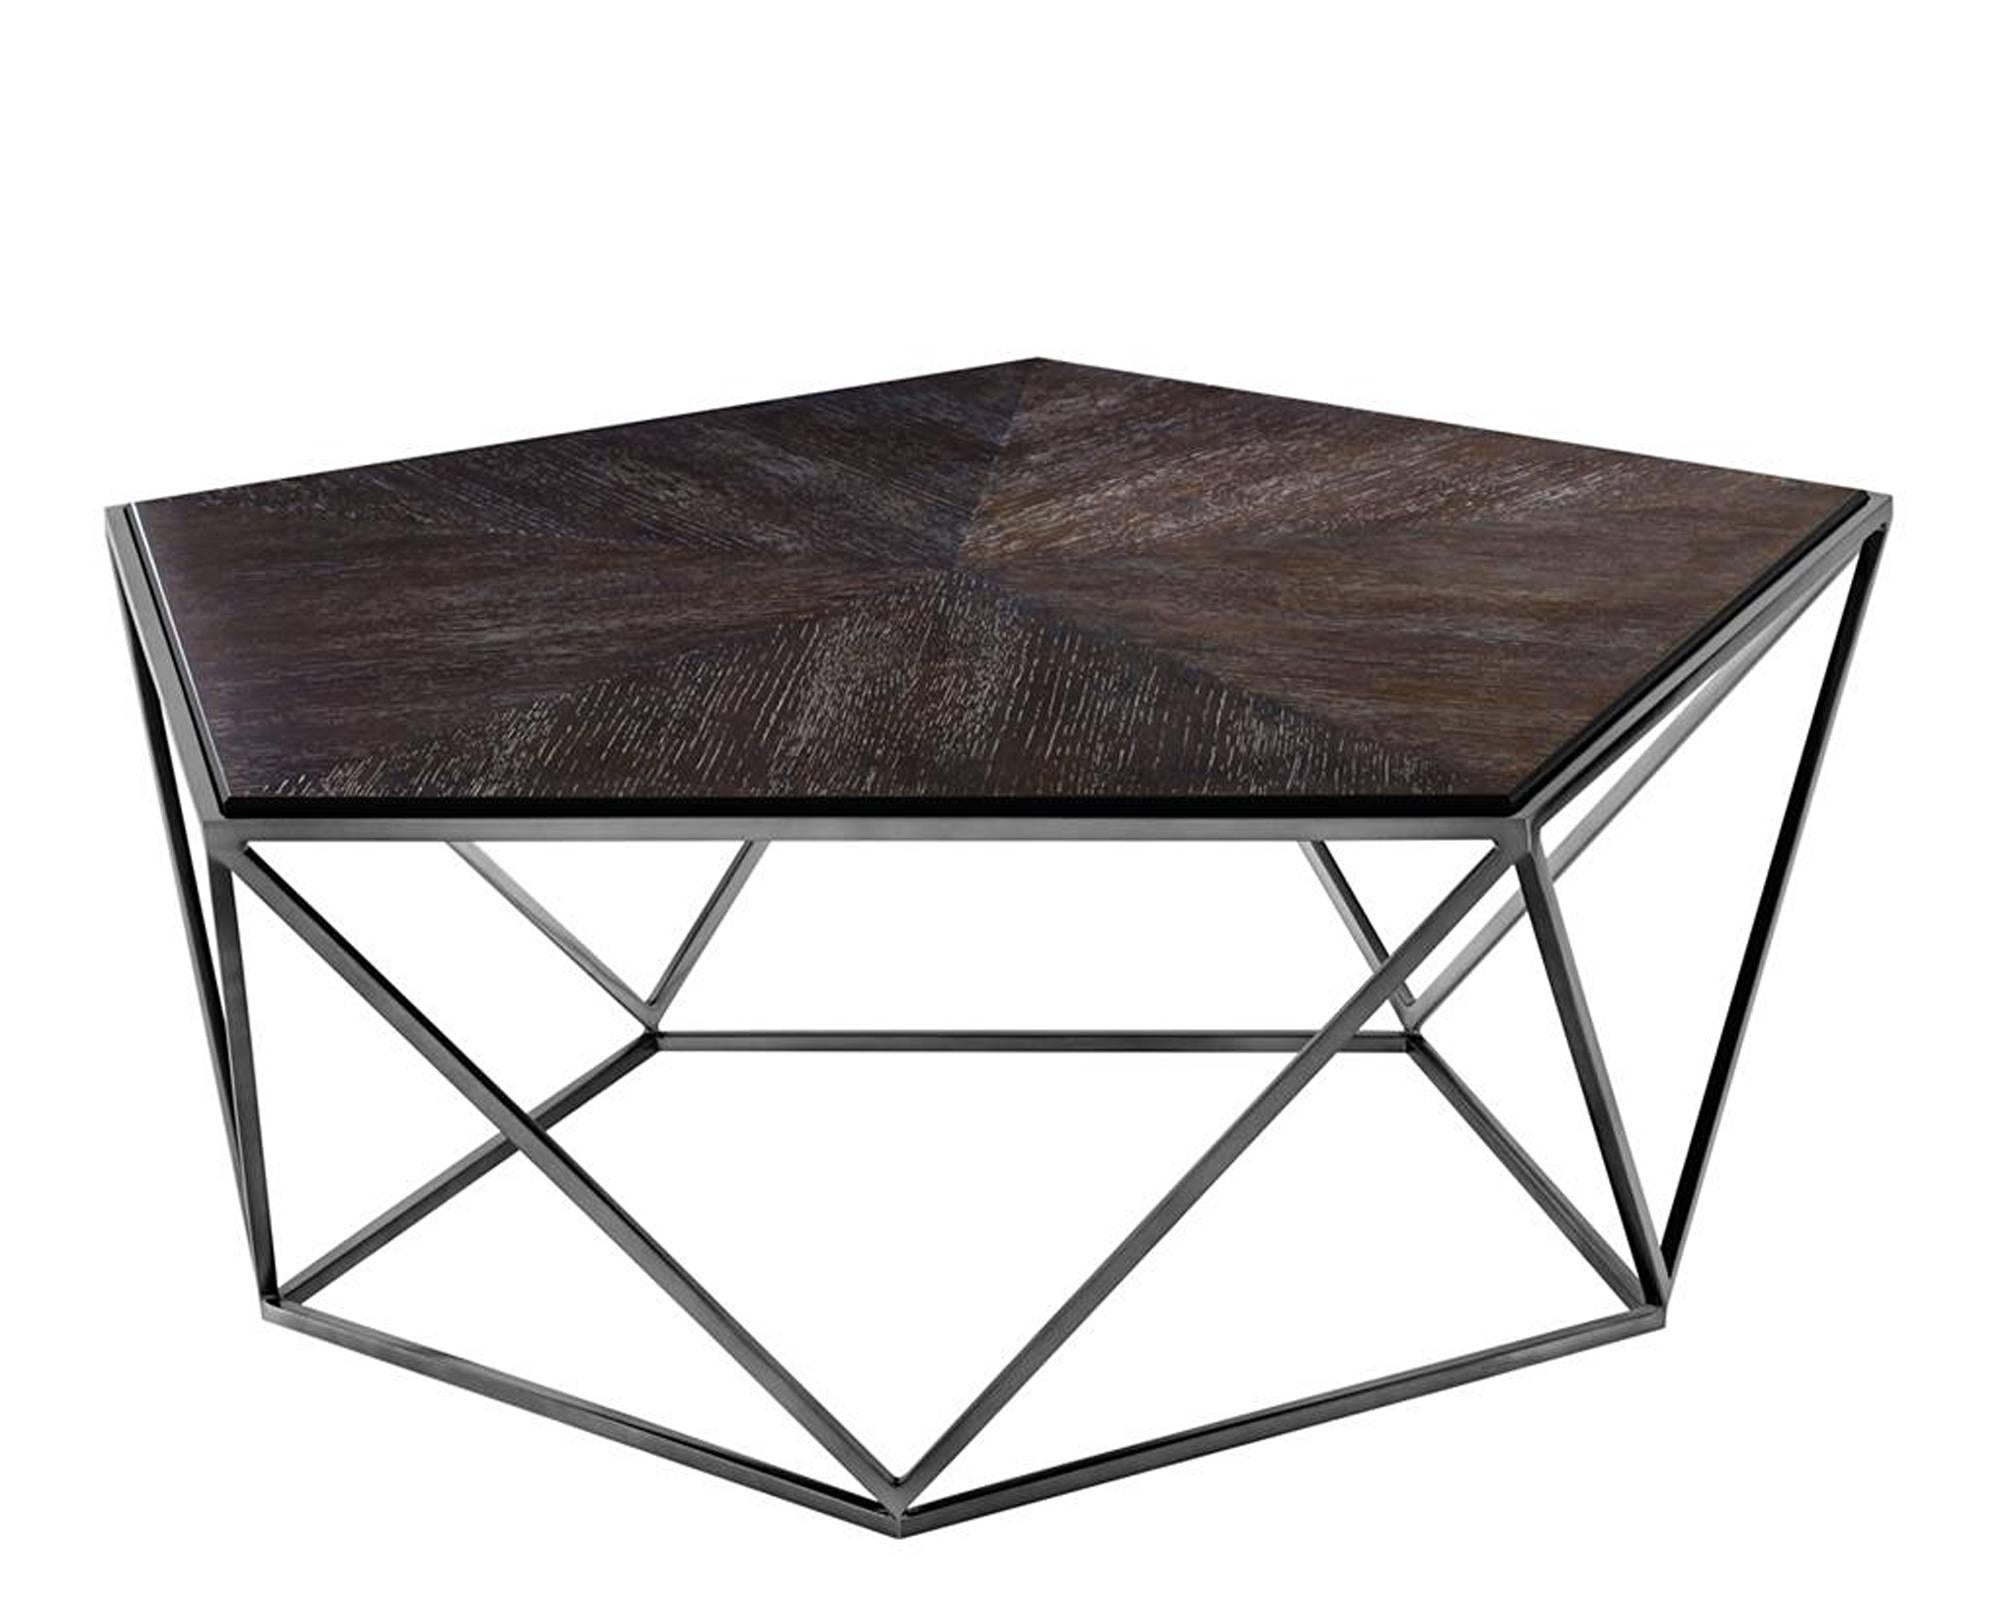 Coffee table penta with charcoal oak veener top
on black nickel finish base. Original piece for living or
office. 